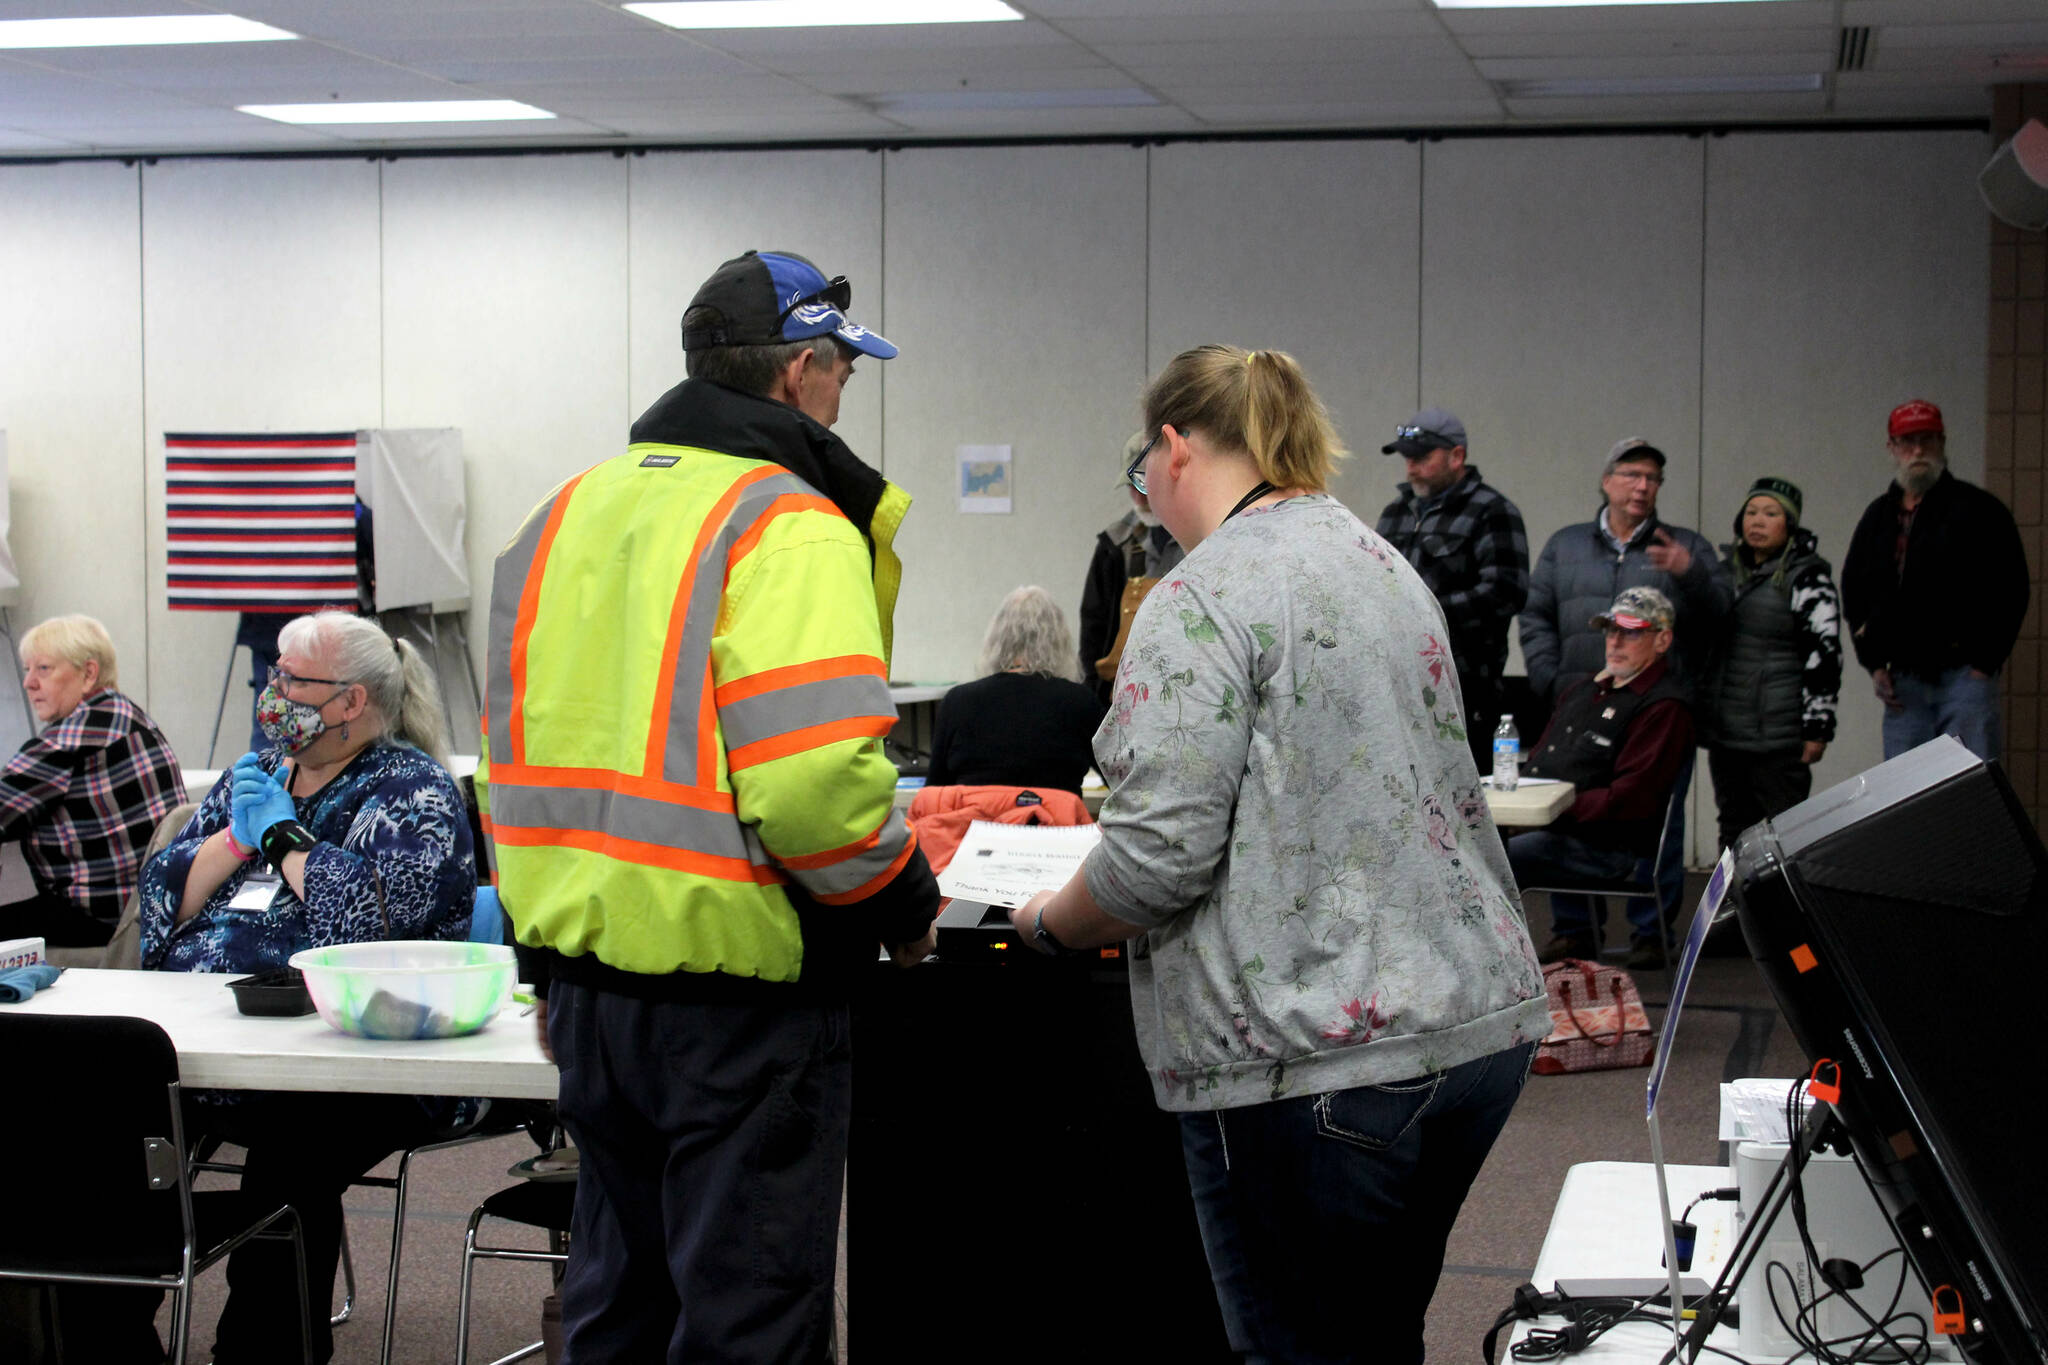 Poll worker Harmony Bolden, right, helps a voter cast their ballot at the Soldotna Regional Sports Complex on Tuesday, Nov. 8, 2022, in Soldotna, Alaska. (Ashlyn O’Hara/Peninsula Clarion)